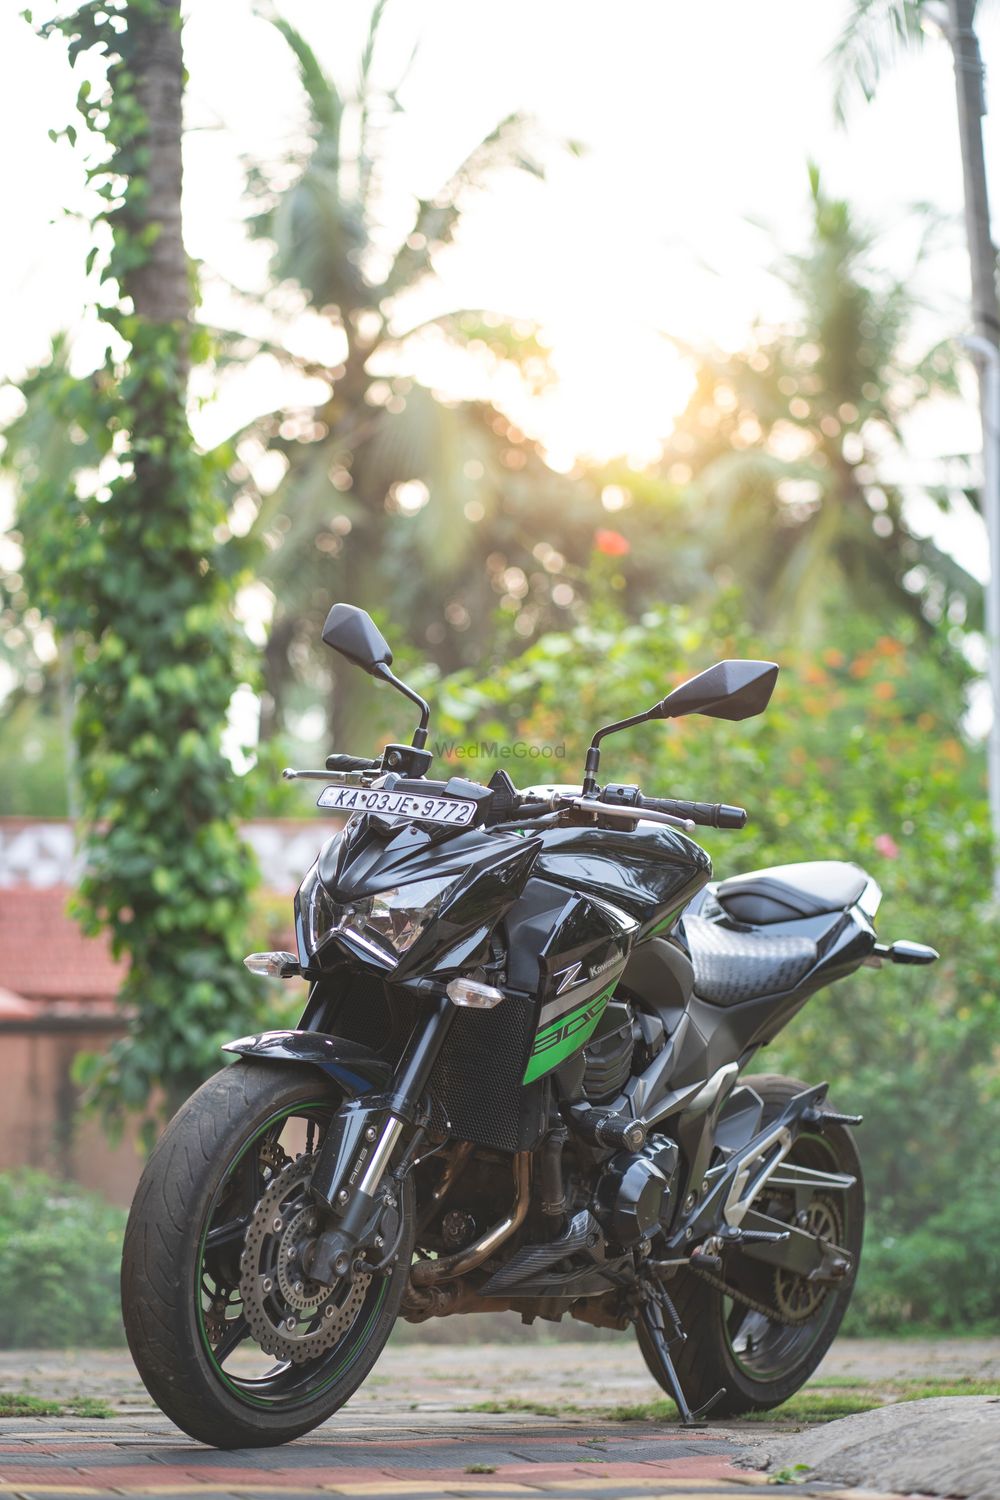 Photo From Bikes - By Adarsh Bhat